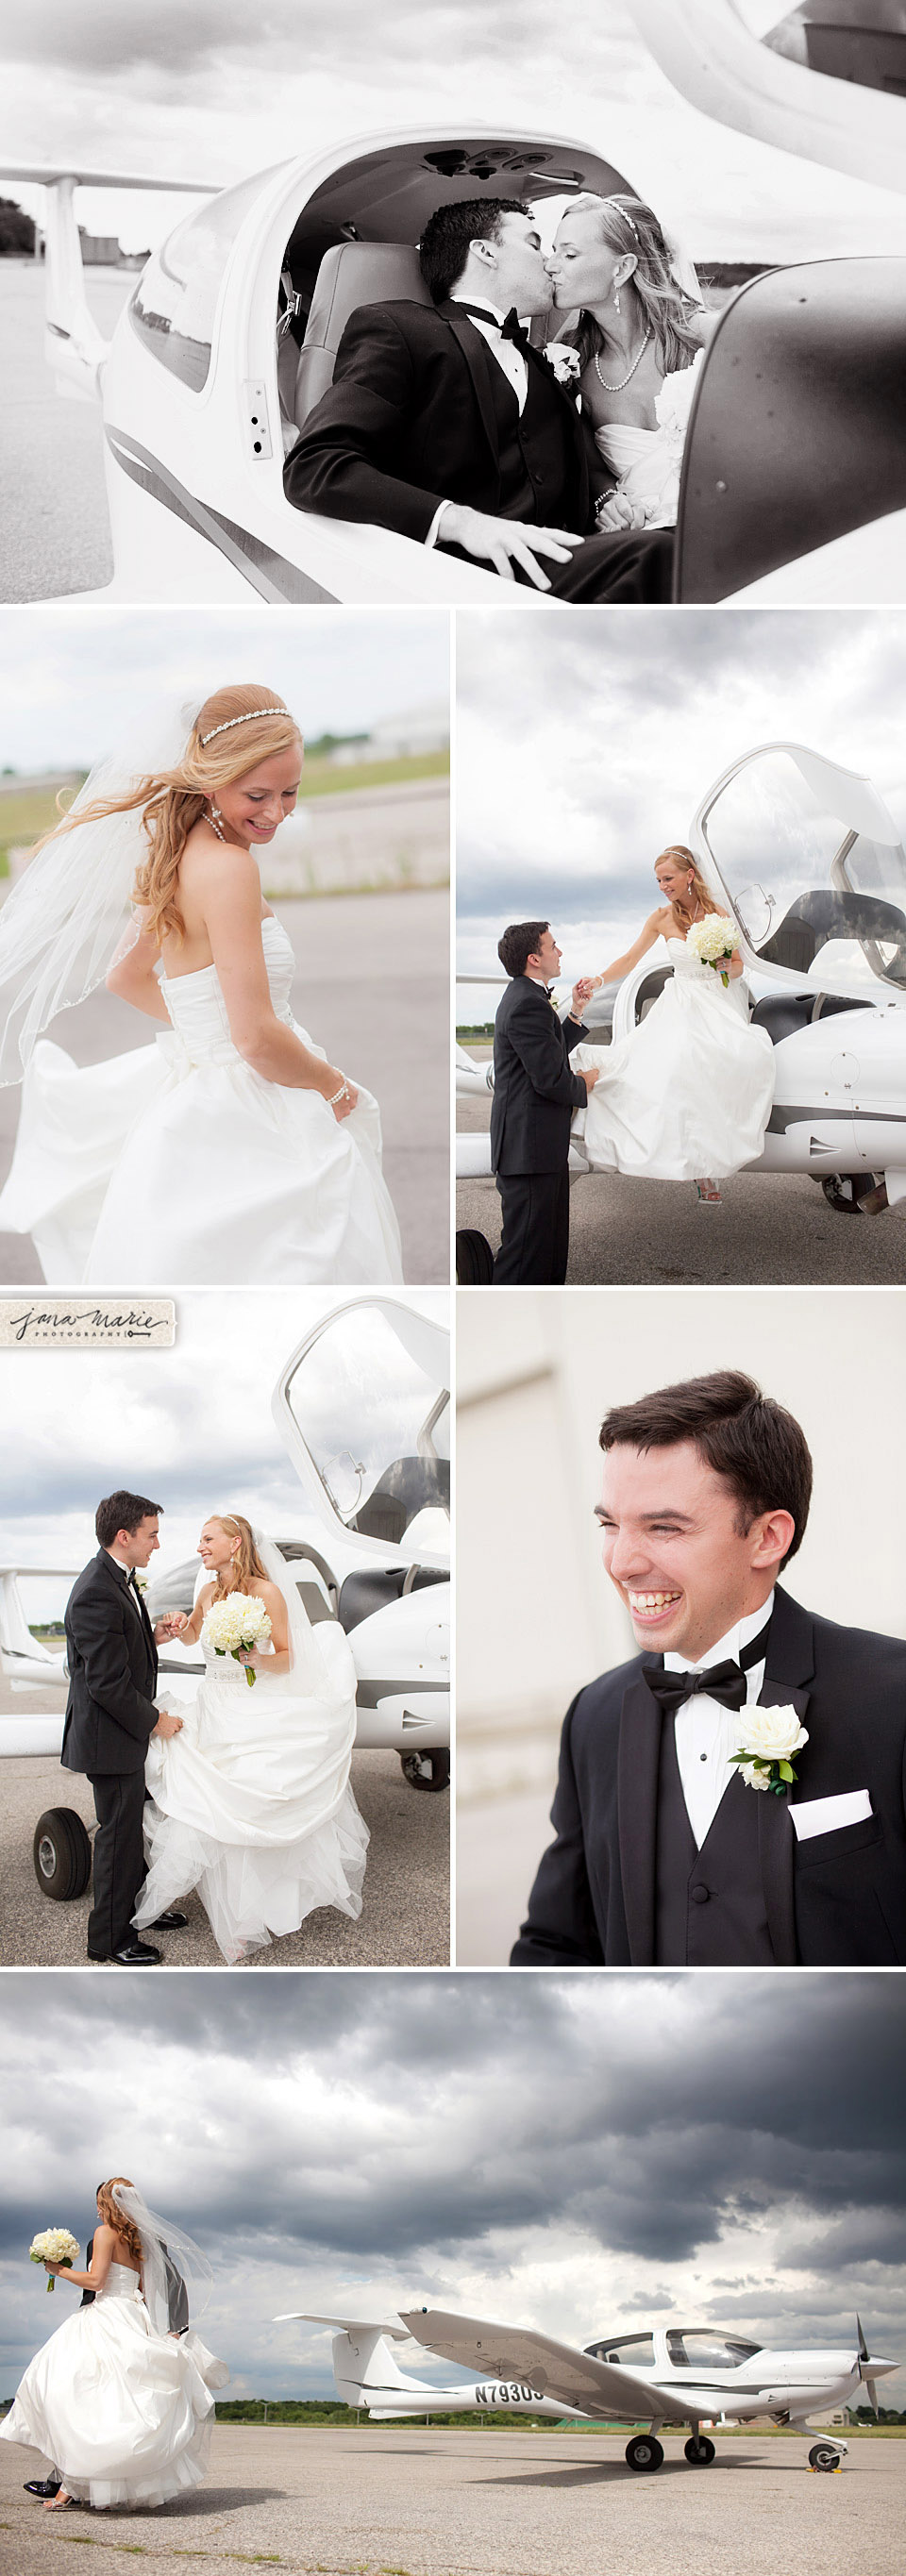 Philip Enloe, Gorgeous bride, windy day, groom laugh, Airplane proposal, Jana Marie Photography